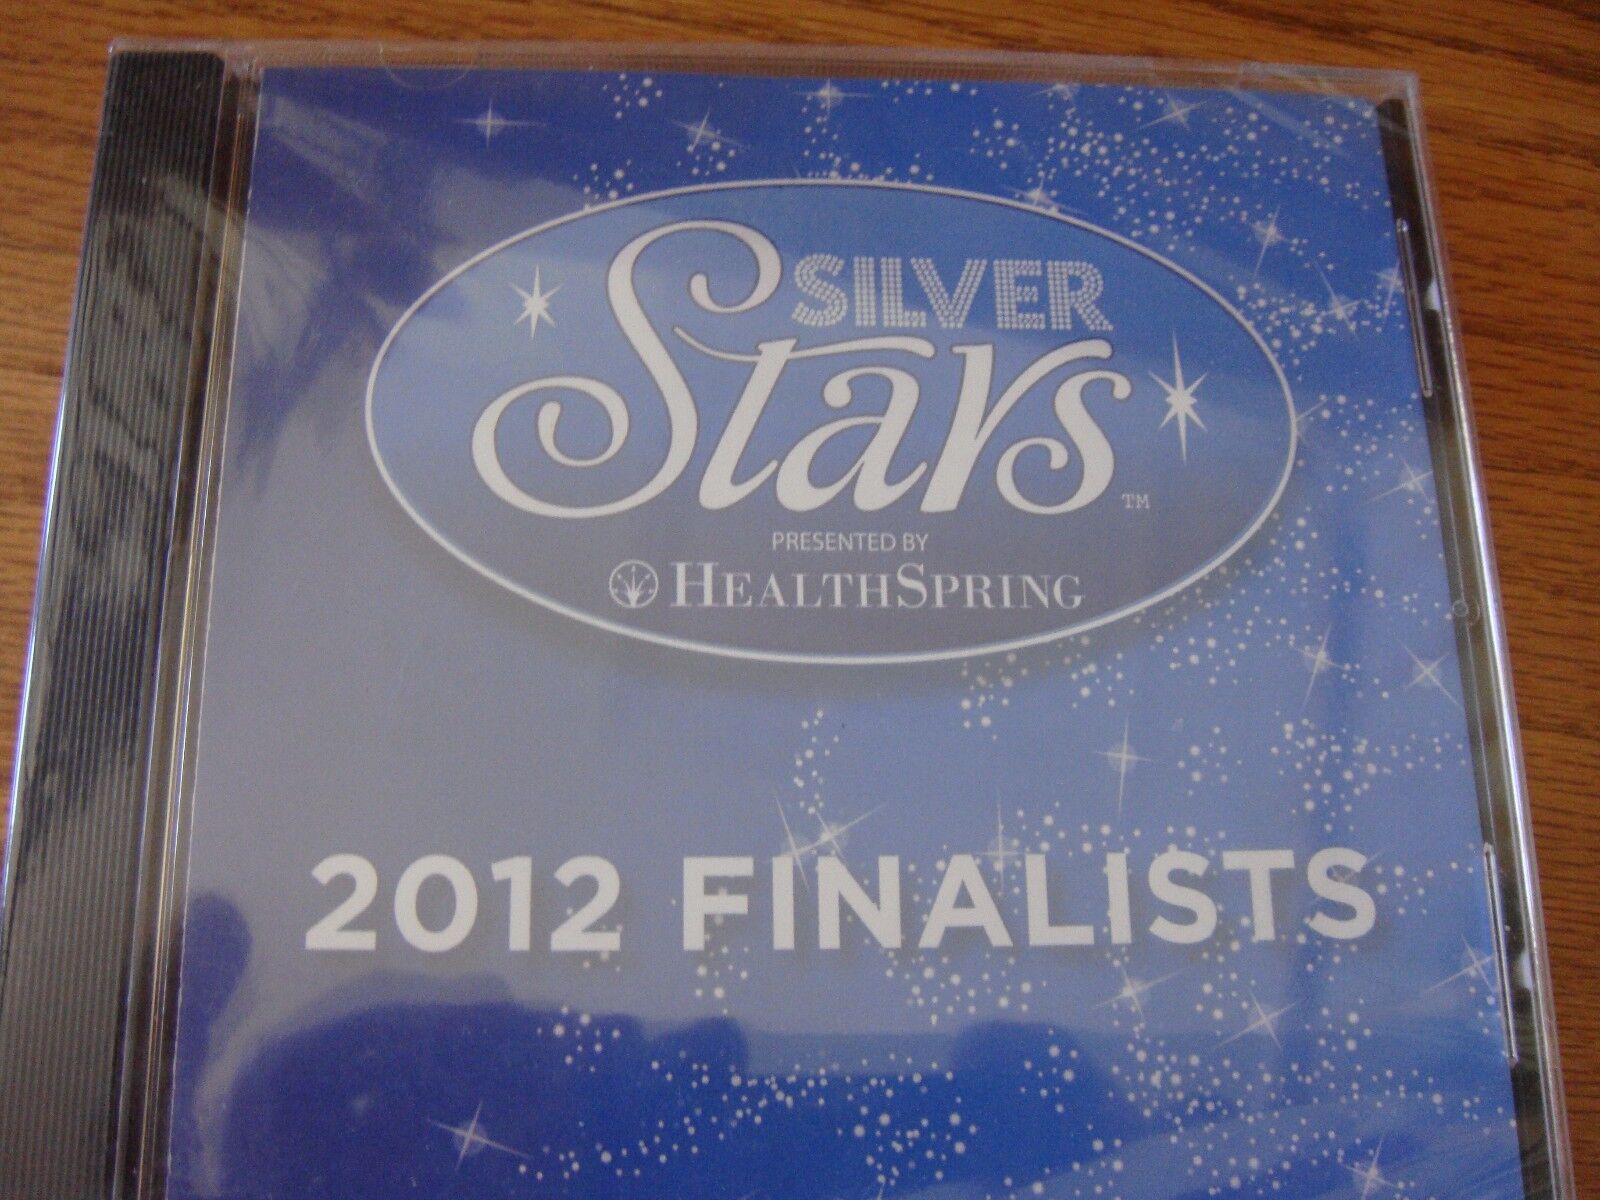 Silver Stars Health Spring 2012 Finalists 11 Songs New In Shrink Wrap 